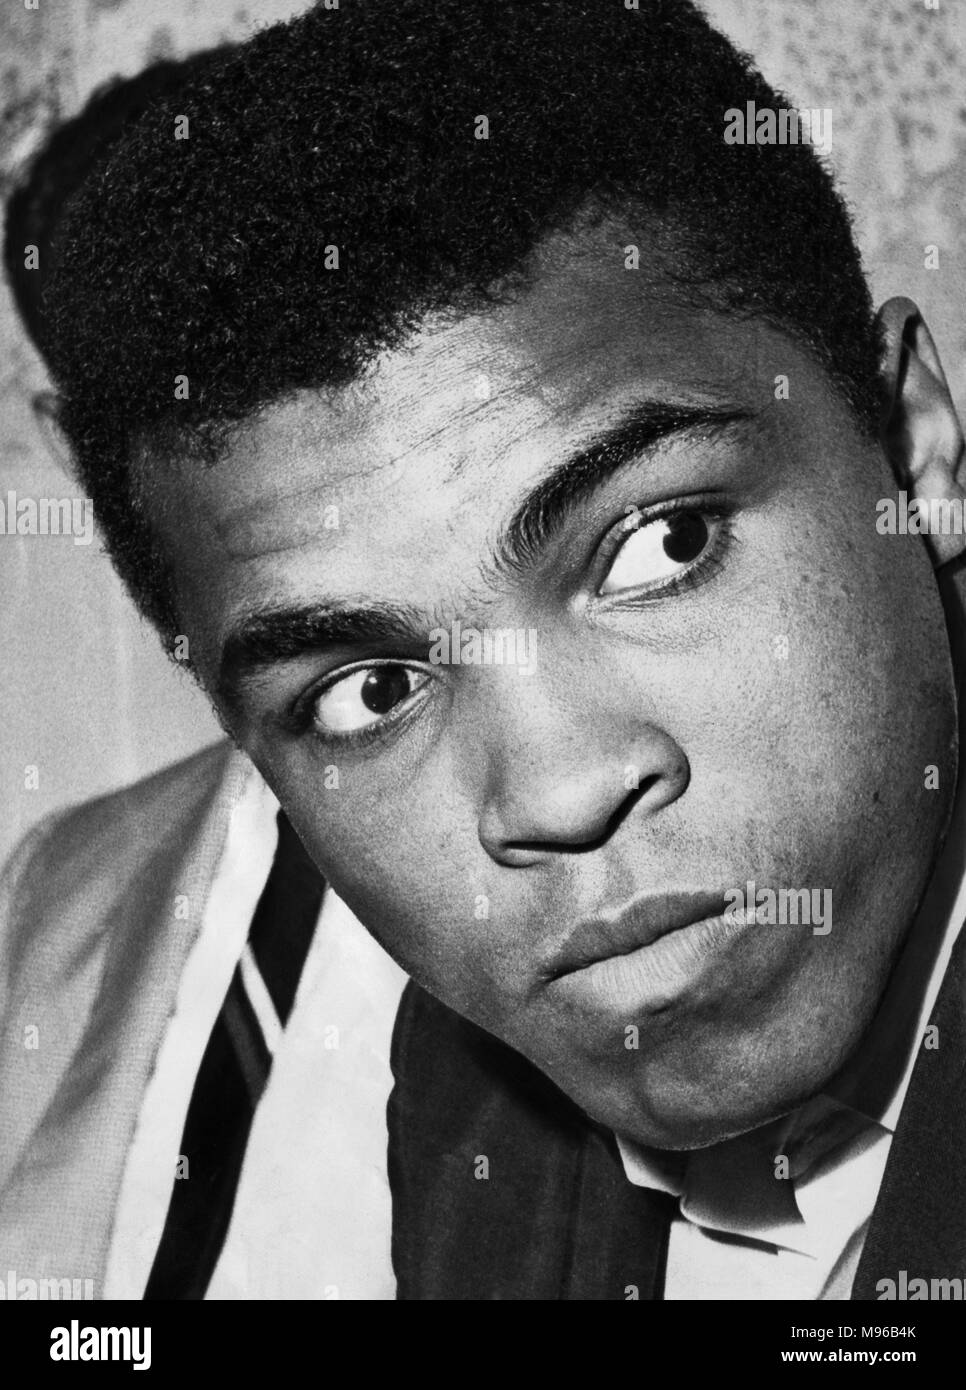 Muhammad Ali born Cassius Marcellus Clay Jr. January 17, 1942 June 3, 2016 was an American professional boxer and activist. He is widely regarded as one of the most significant and celebrated sports figures of the 20th century. From early in his career, Ali was known as an inspiring, controversial, and polarizing figure both inside and outside the ring. (Picture) Clay shortly after arriving in Glasgow. 18th August 1965 Stock Photo